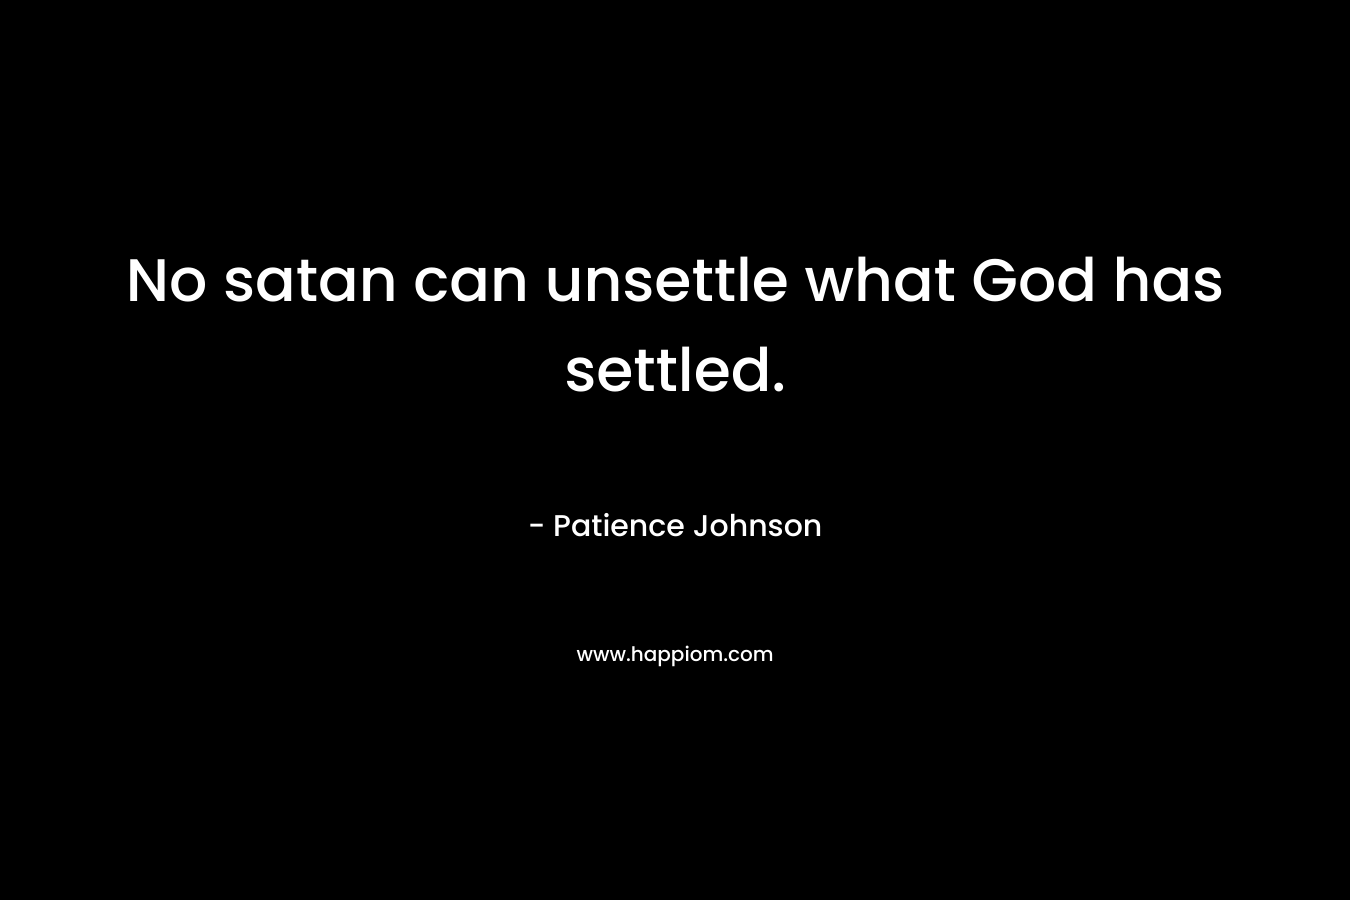 No satan can unsettle what God has settled. – Patience Johnson